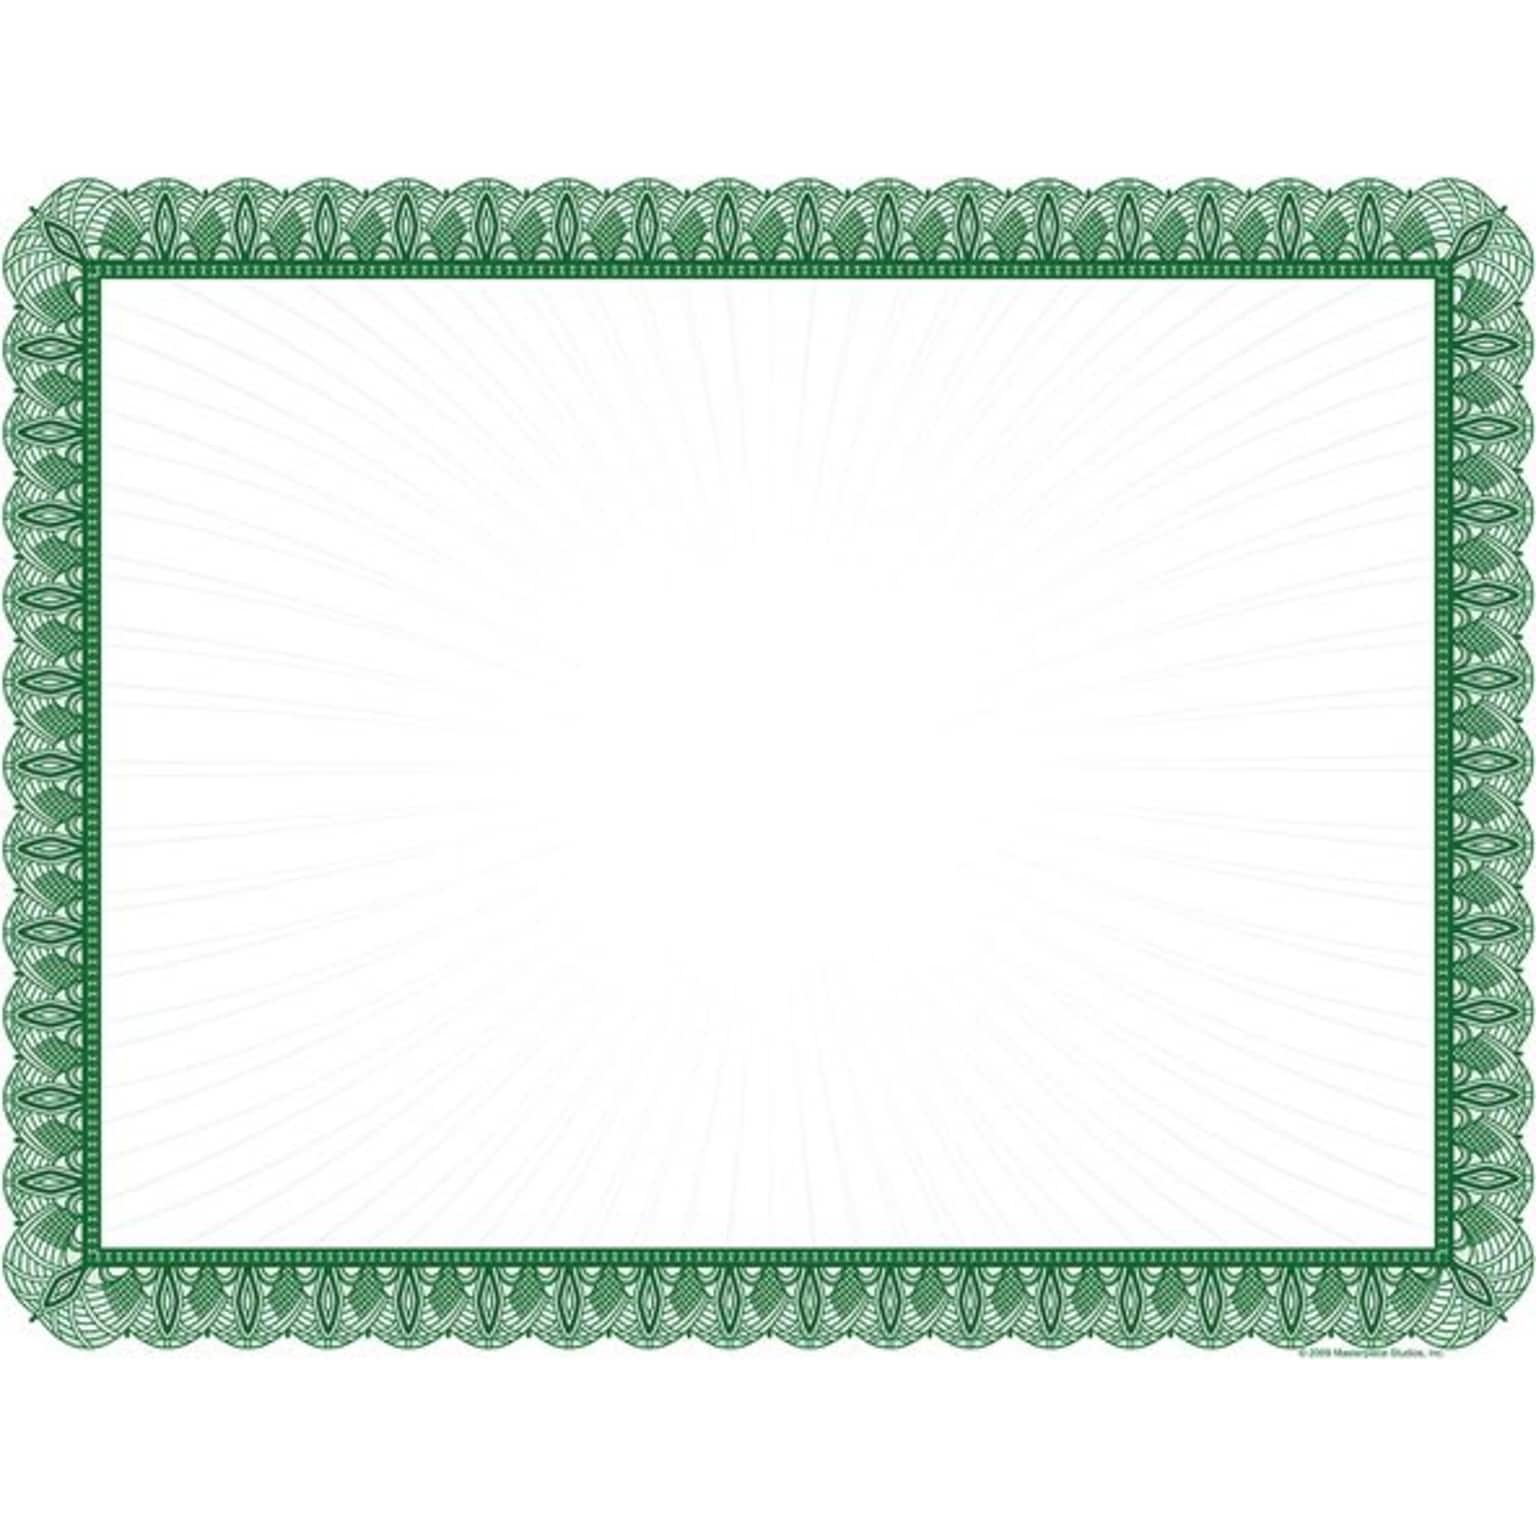 Masterpiece Studios Certificates, 8.5 x 11, Green and White, 100/Pack (961036S)